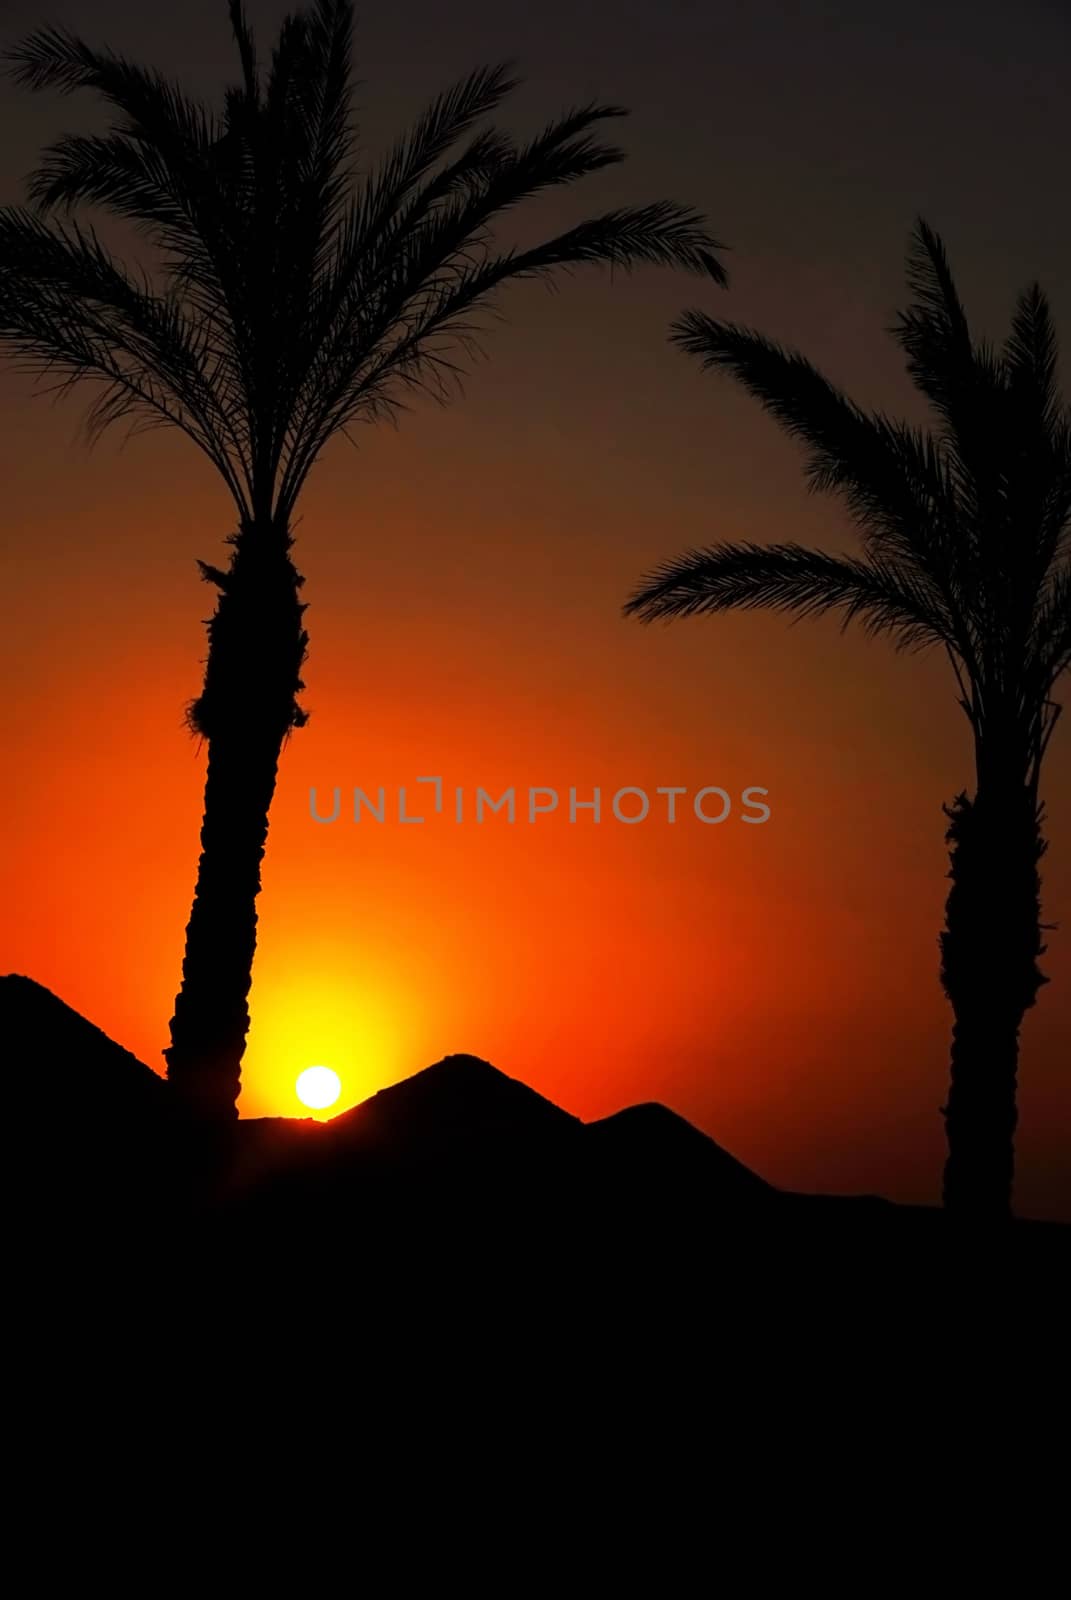 Sunset in Egypt by simply